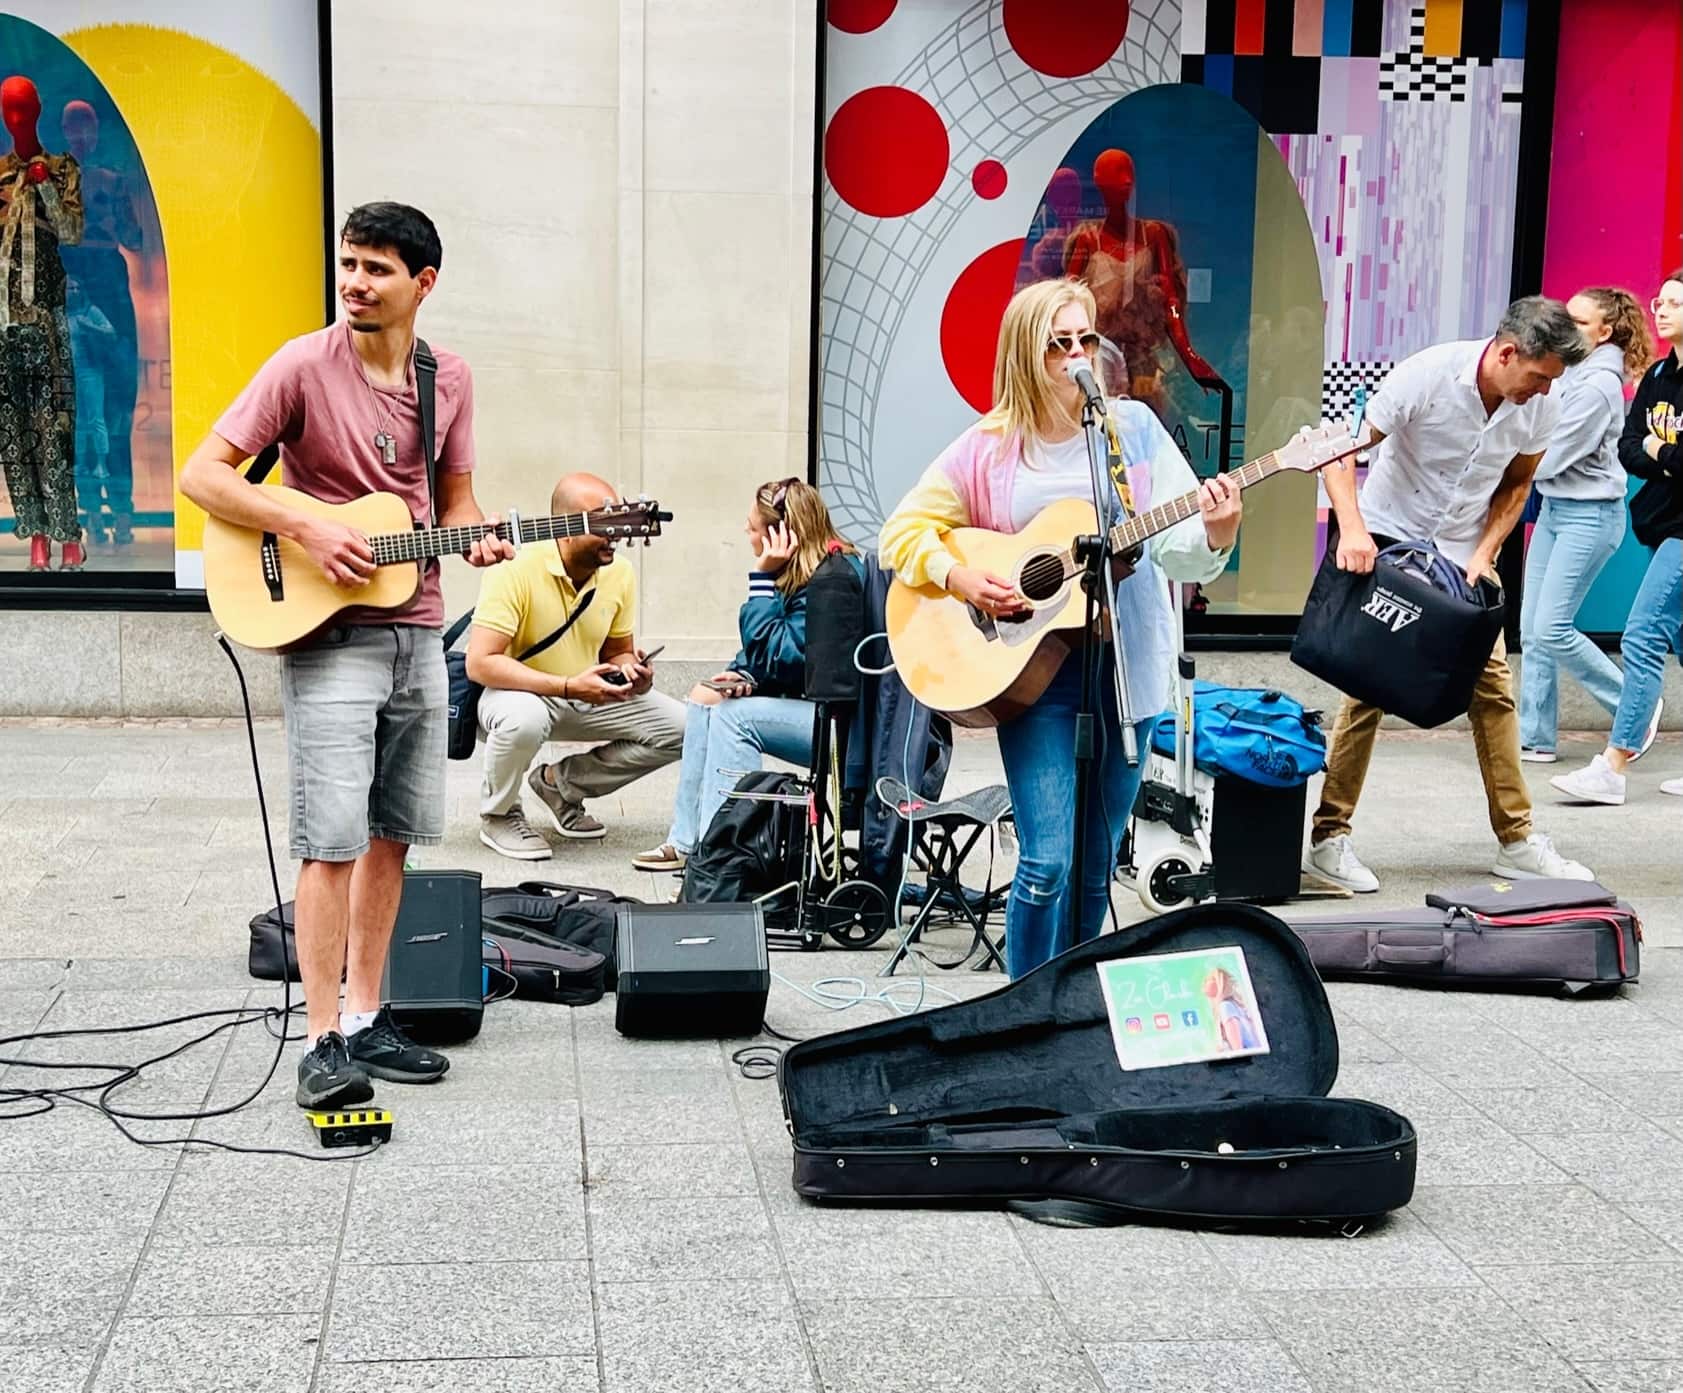 Street Entertainment: Busking on the Streets Guide